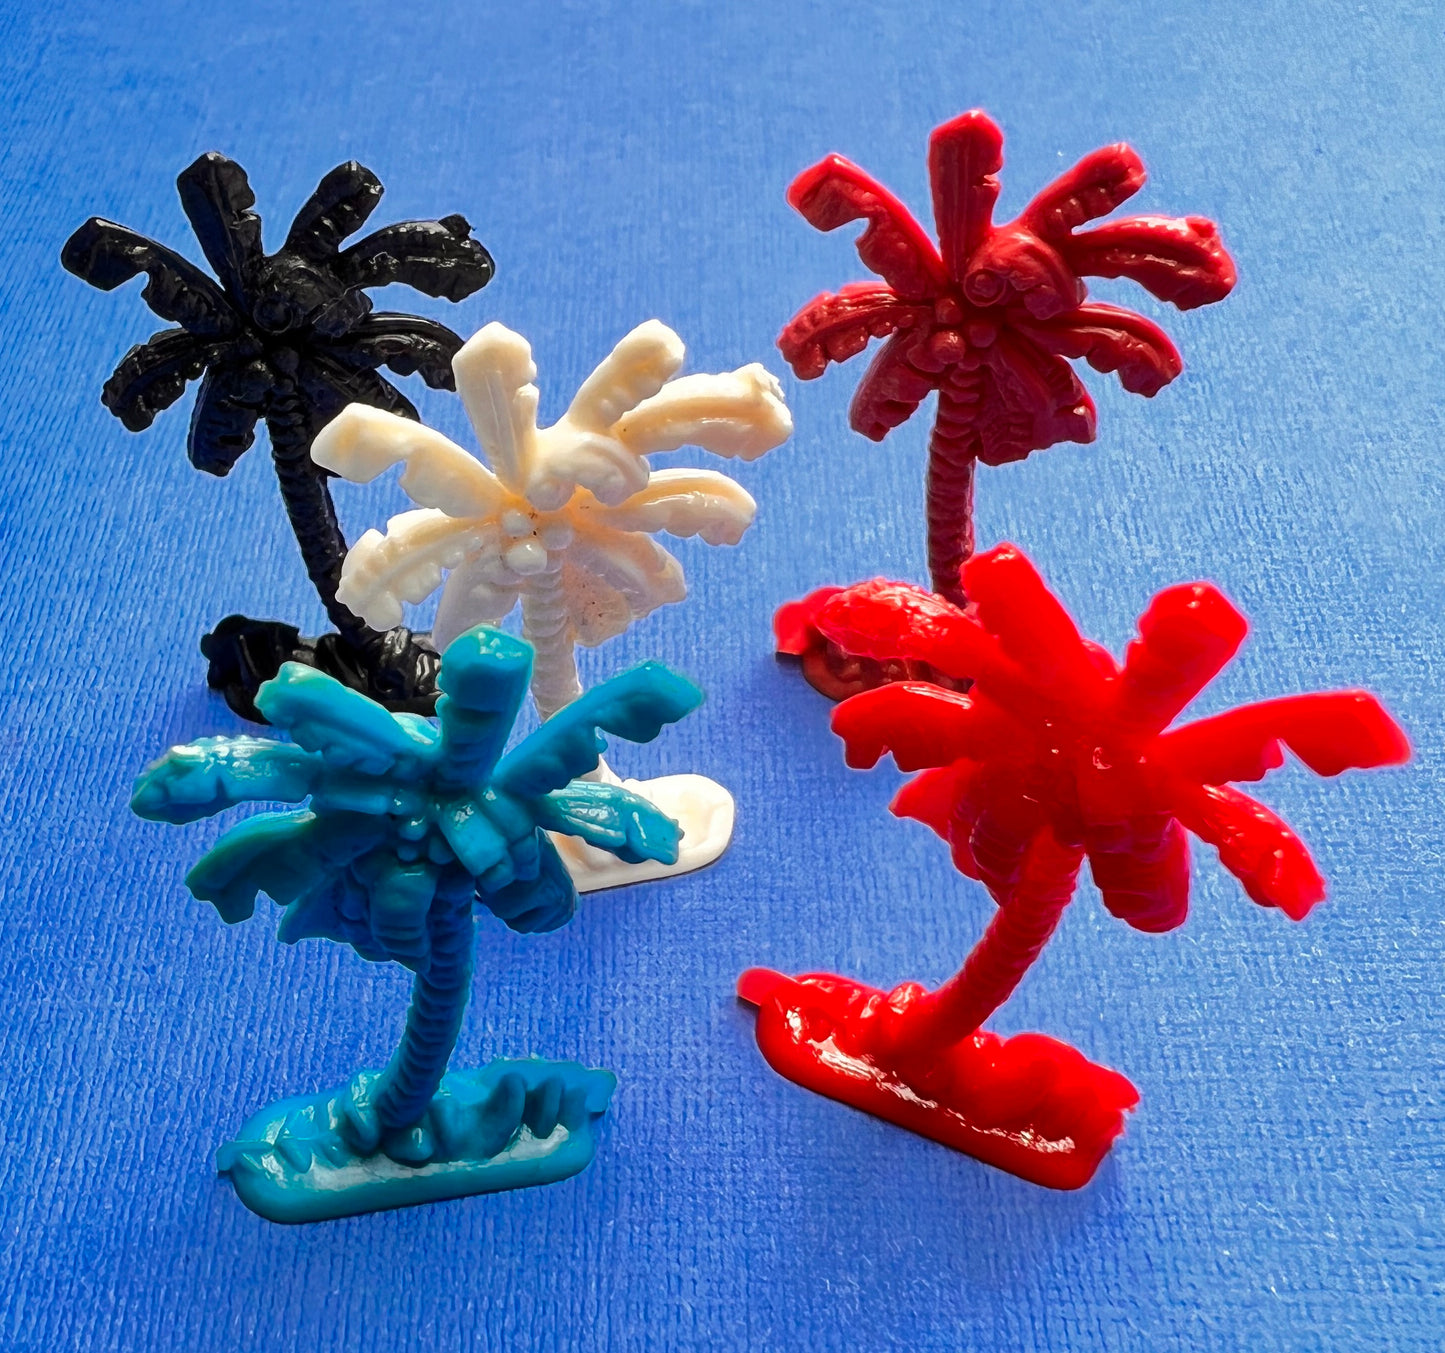 Vintage Plastic Palm Trees ...on Stands 3 or 4cm Tall